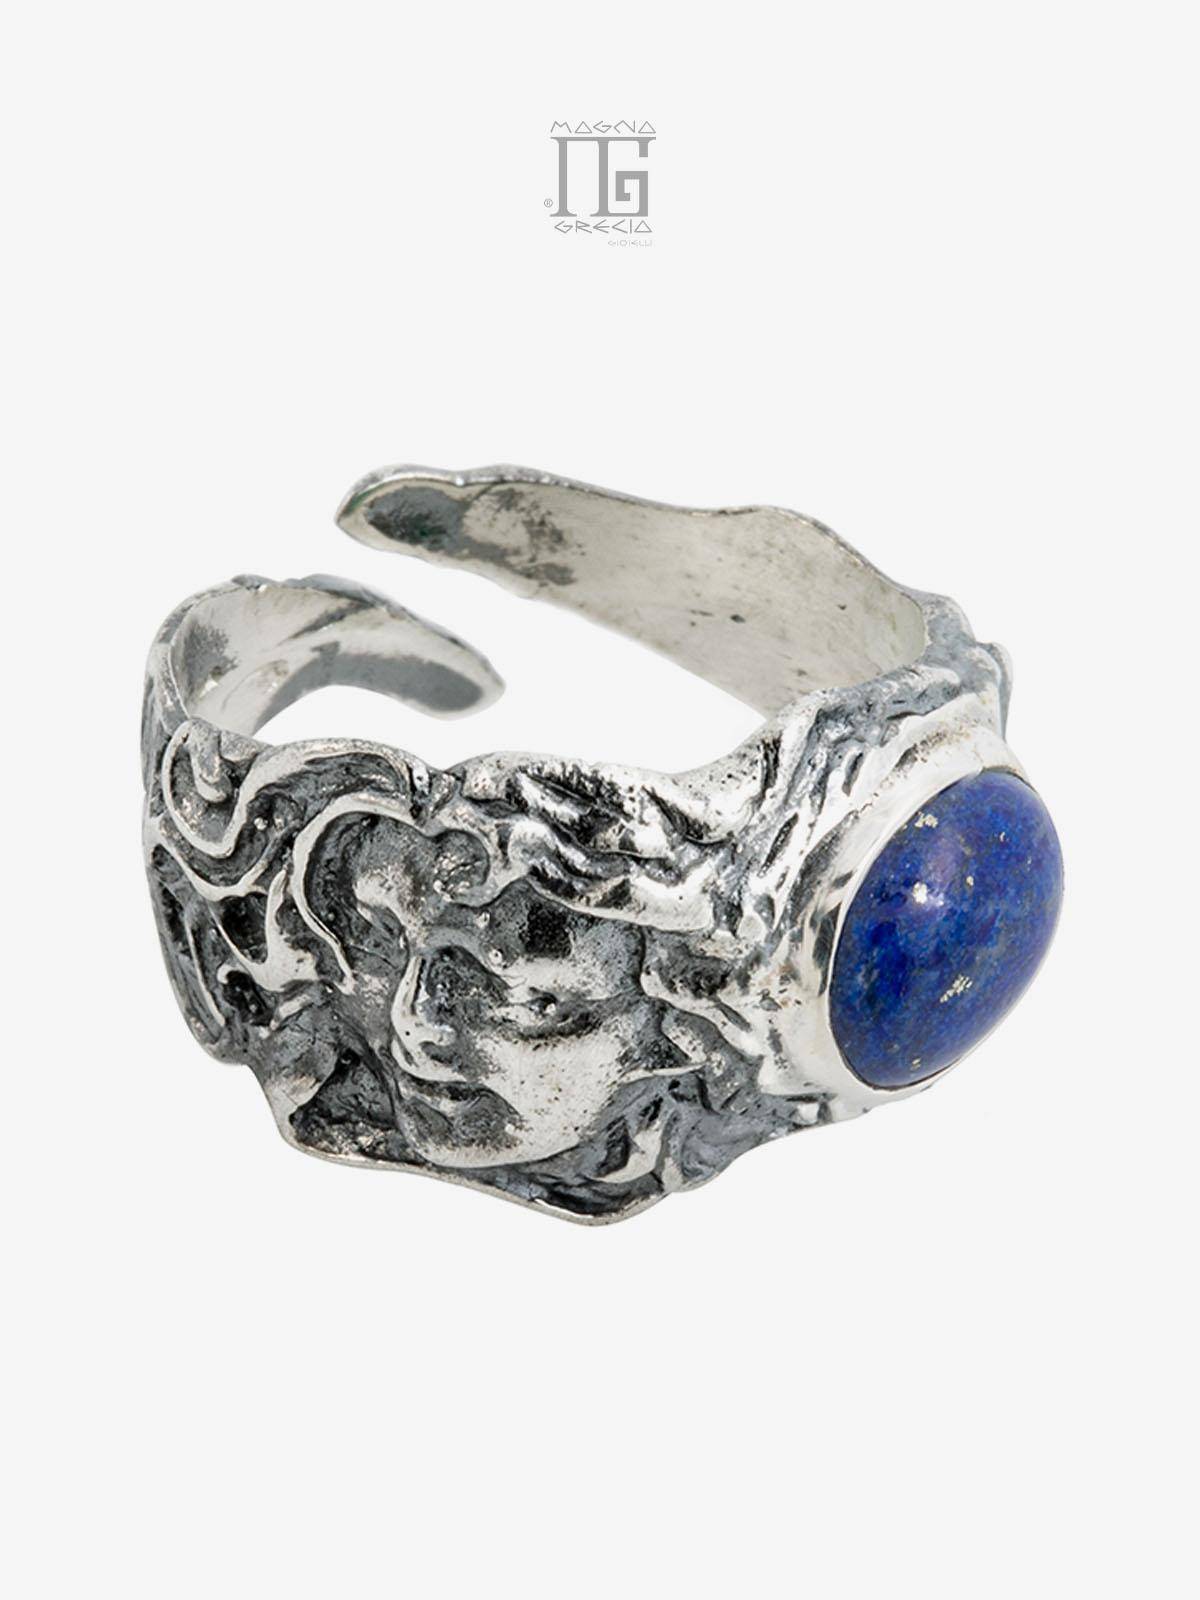 "Tranquility" Ring in Silver with the Face of the Goddess Venus and blue Lapis Lazuli Cod. MGK 3003 V-4